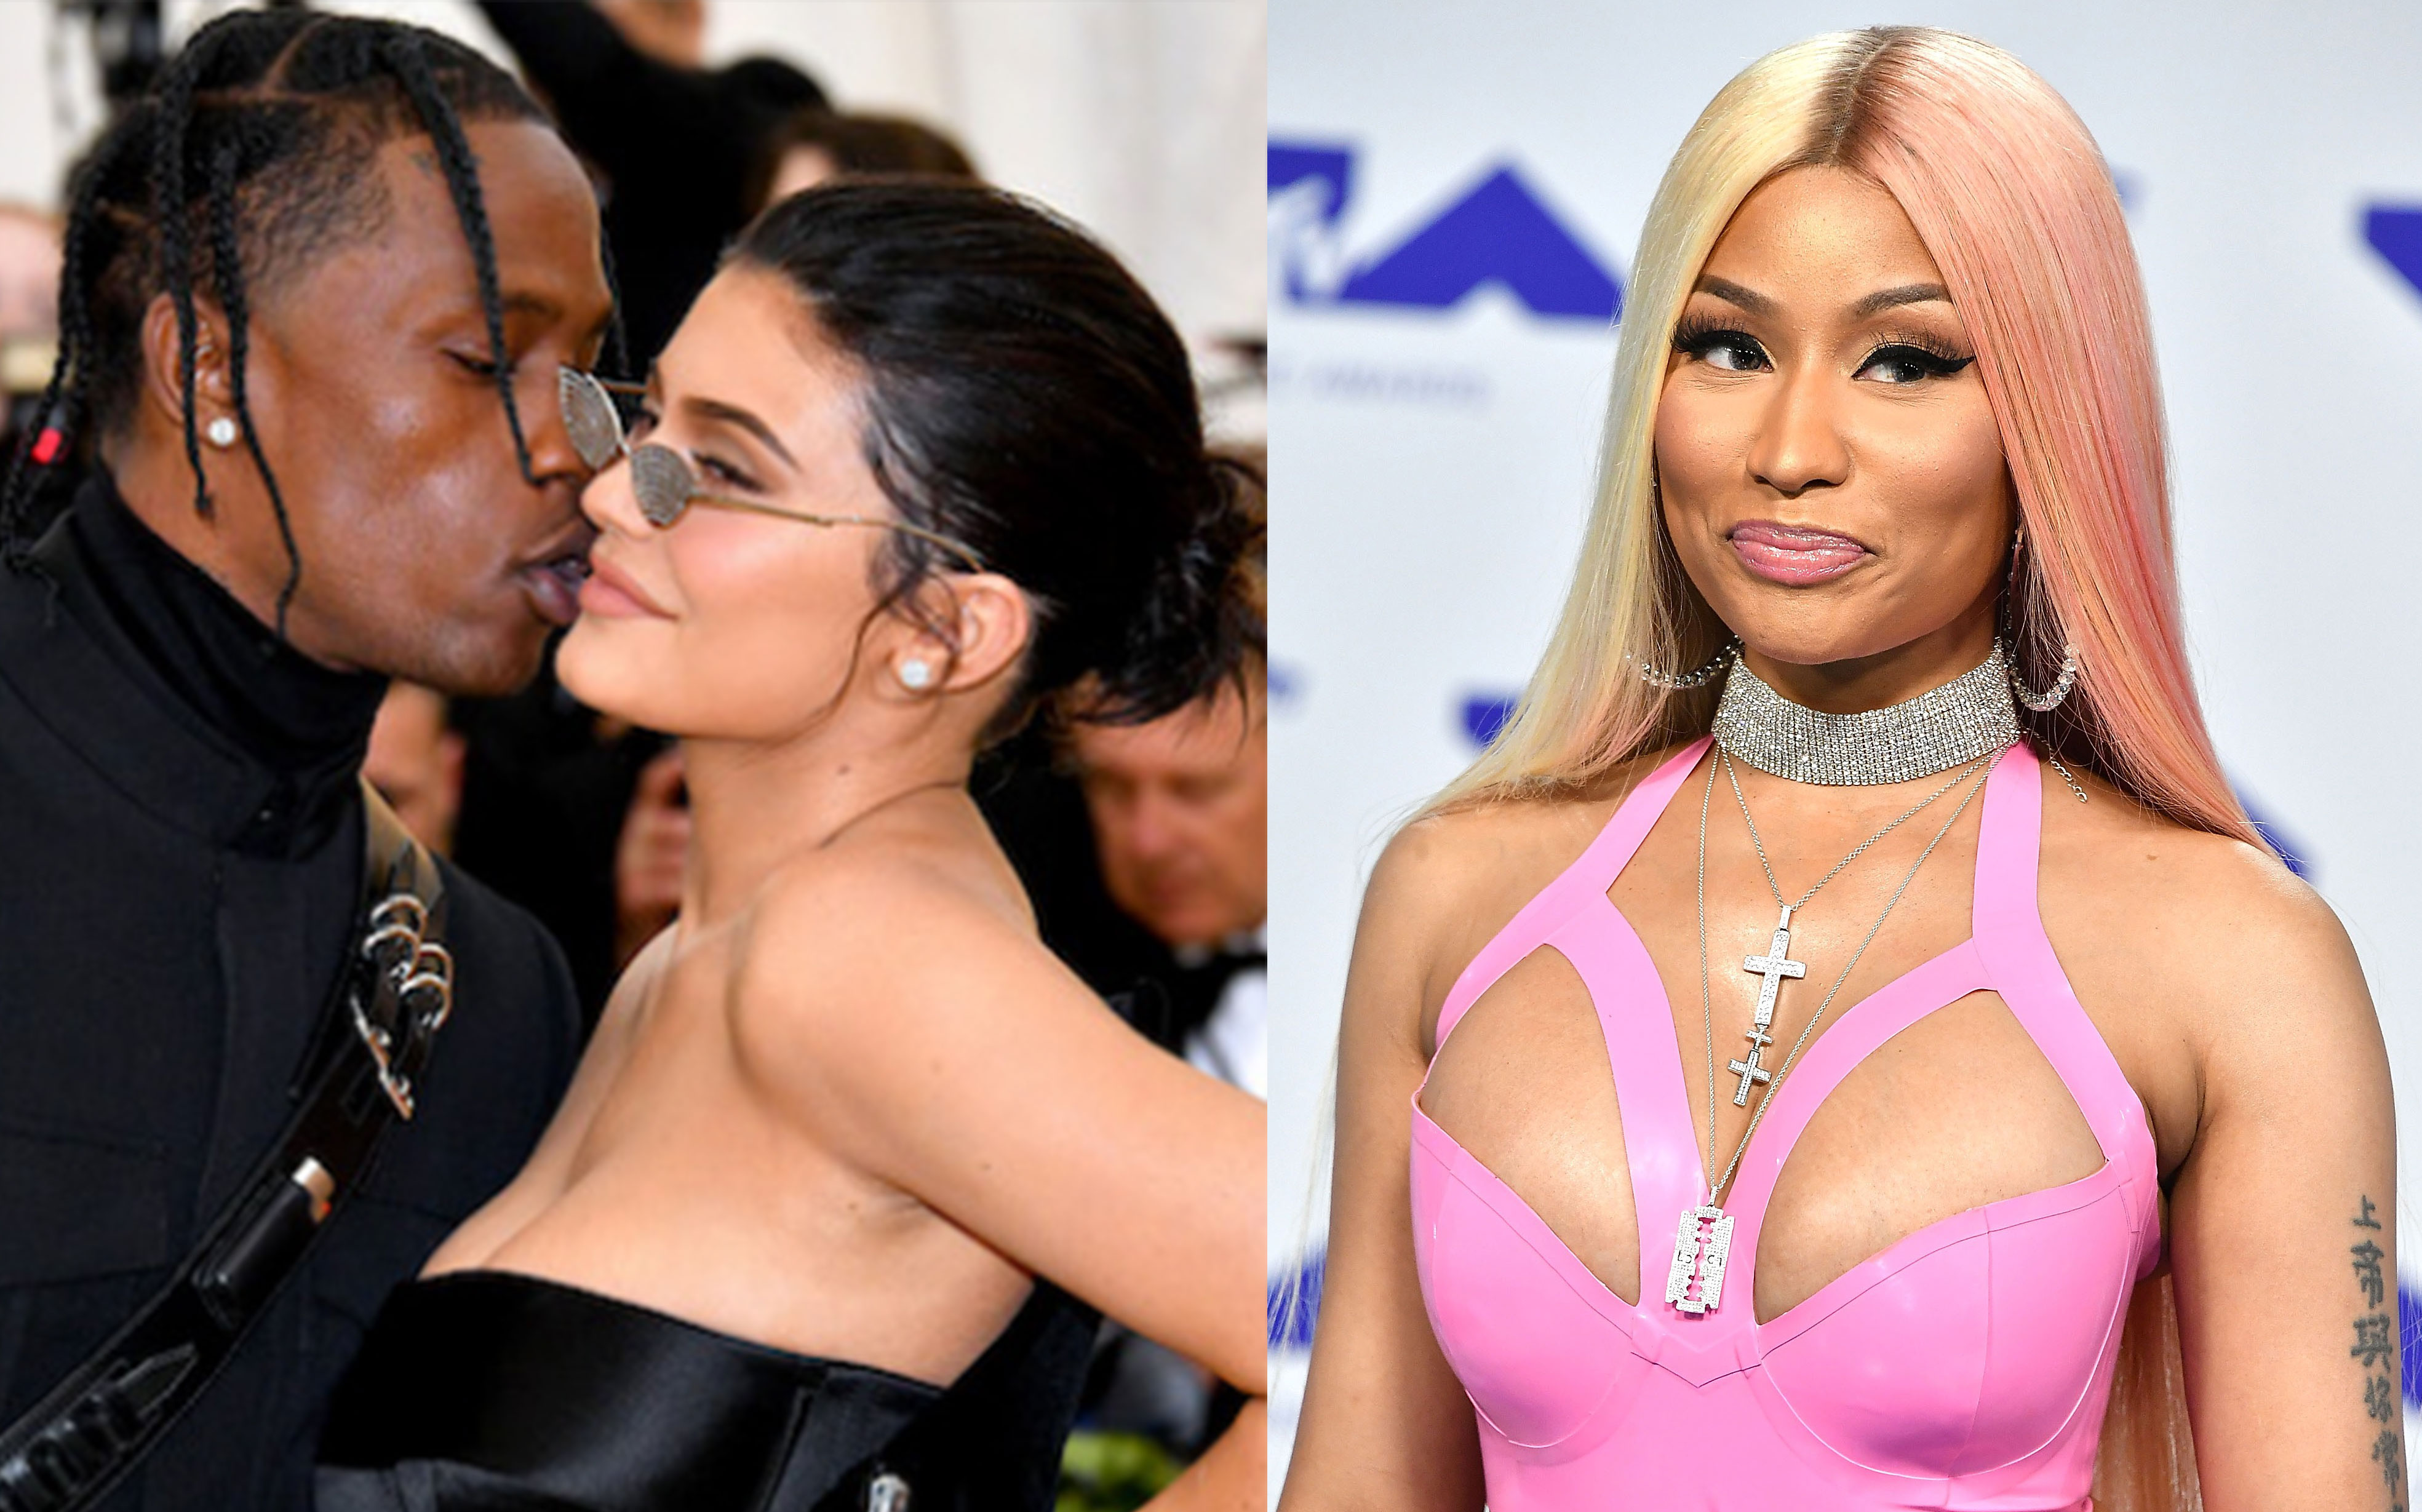 Nicki Minaj Reacts To Footage Of Kylie Jenner Running From Her At The VMAs